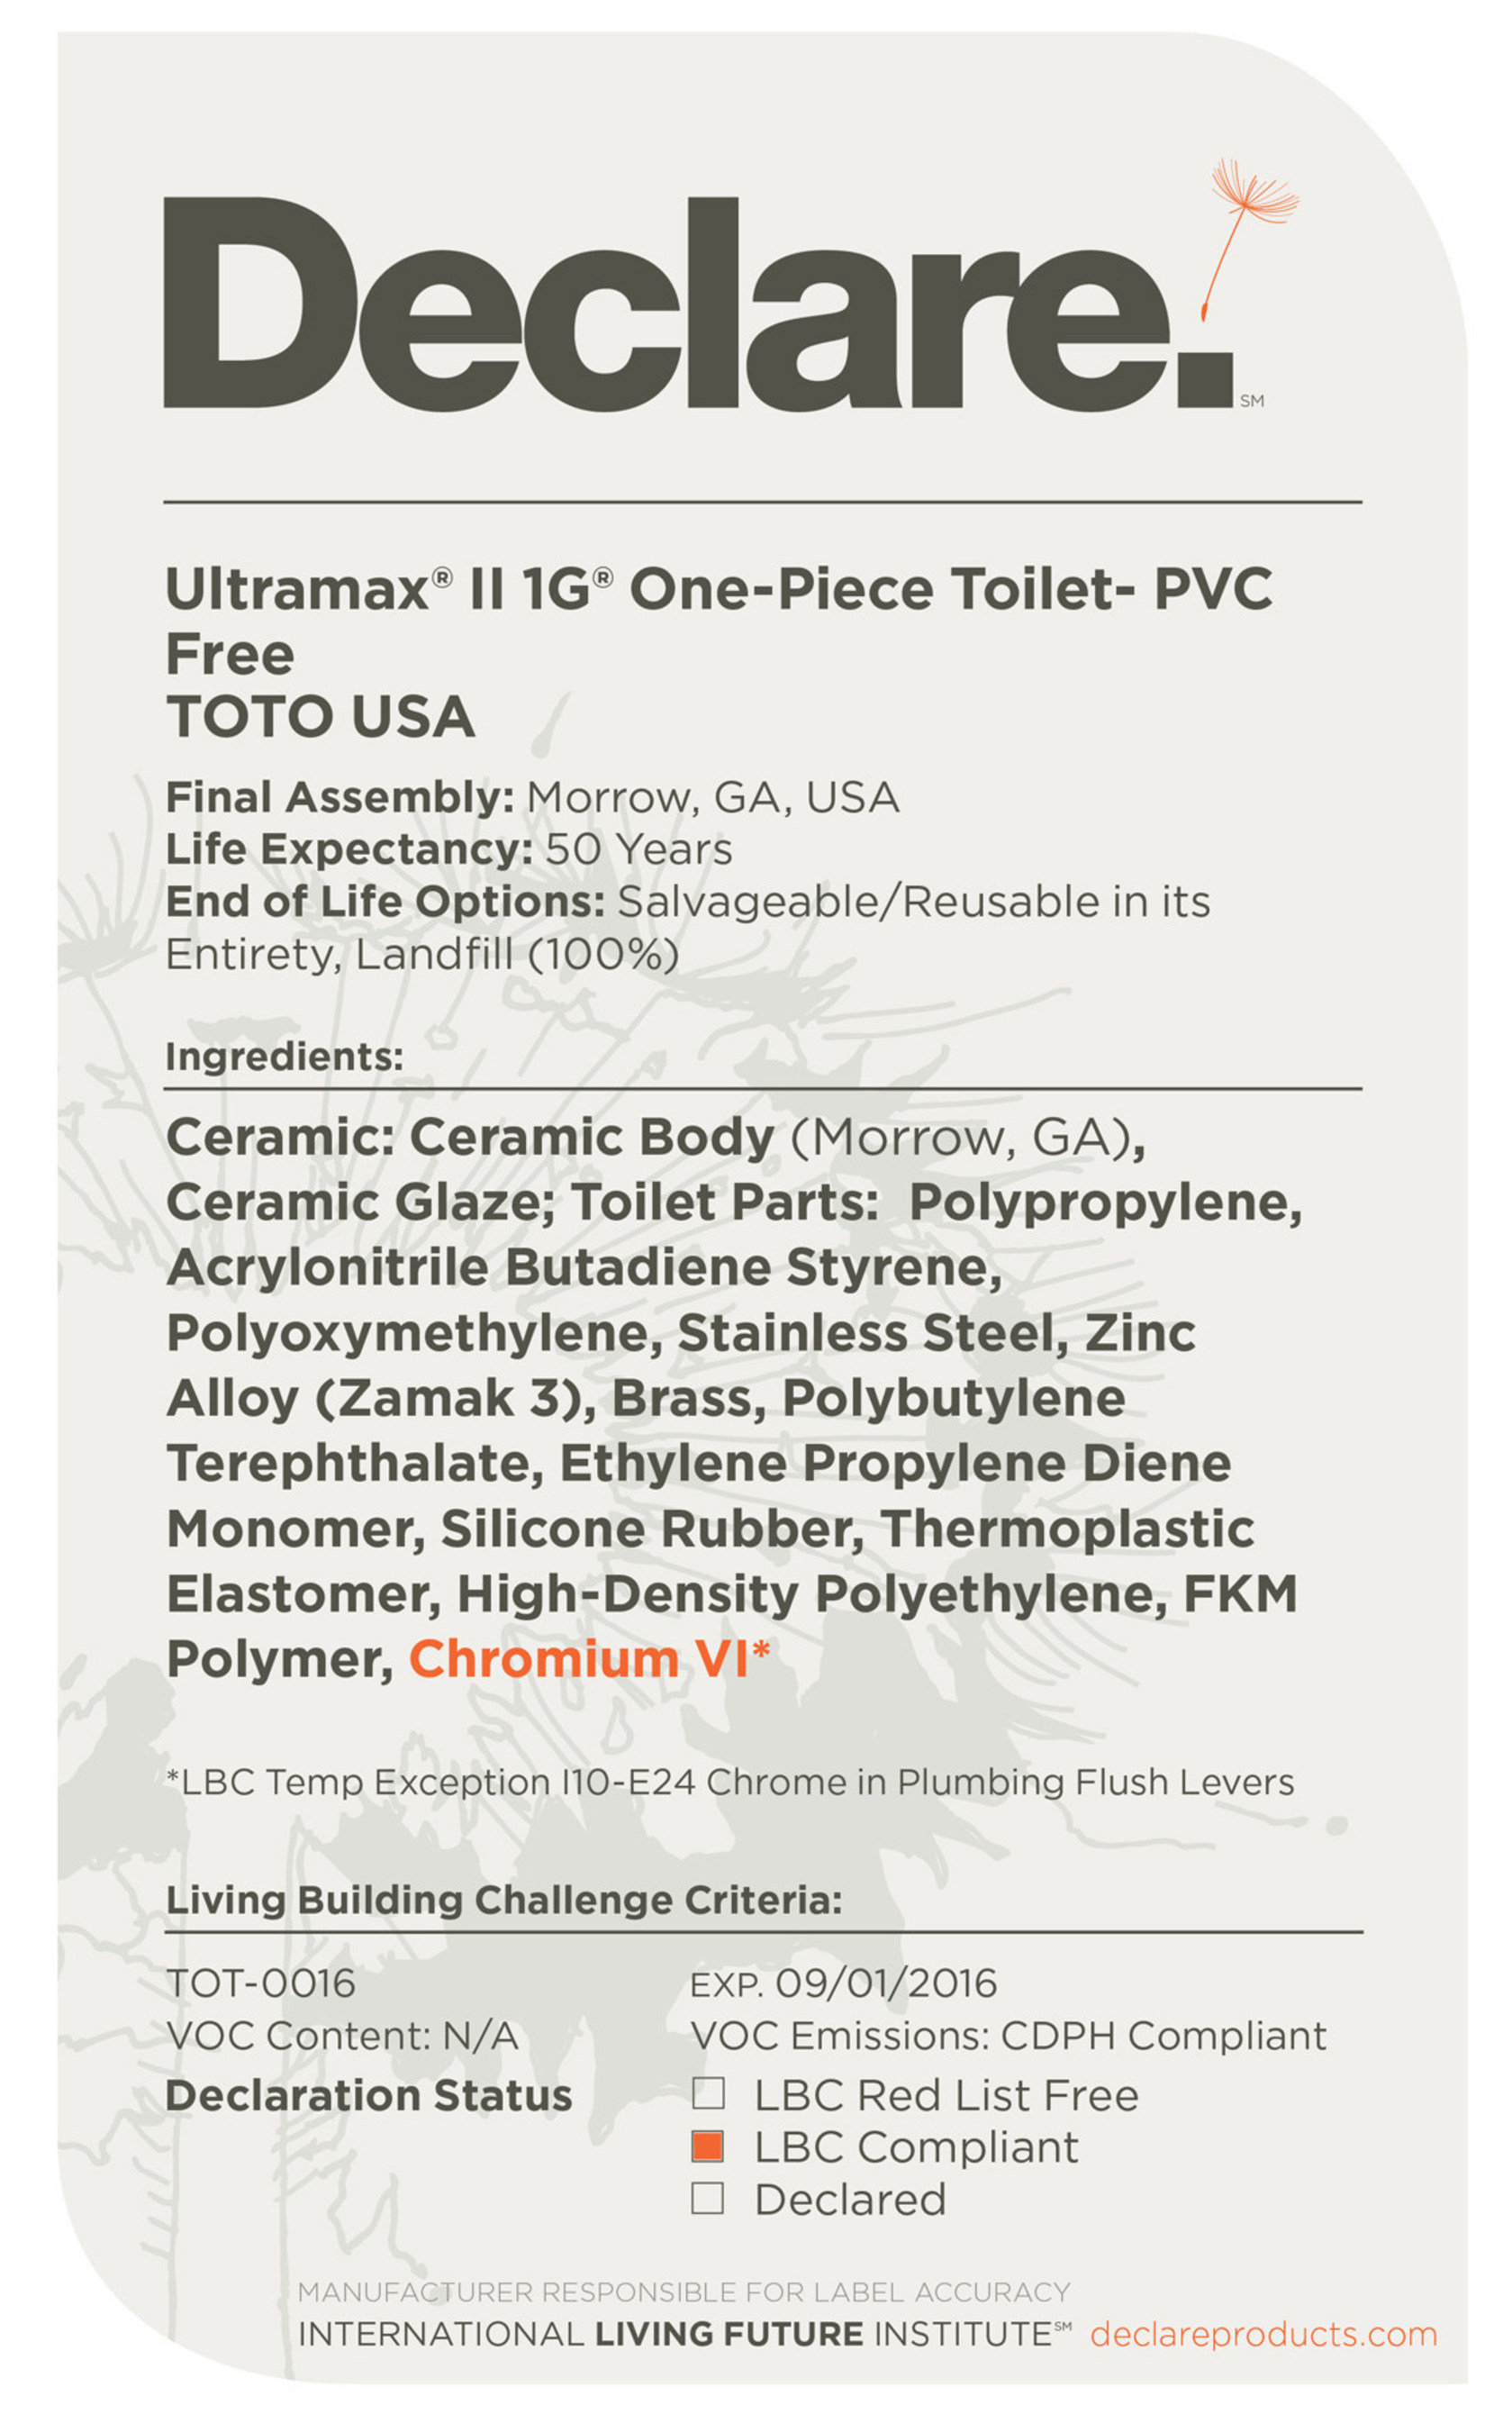 TOTO is the only plumbing manufacturer whose products have earned the International Living Future Institute's prestigious Declare label and are listed in the Declare Products Database. TOTO now has the only toilets in the Declare database that comply with the Living Building Challenge, the world's most advanced sustainability certification in the built environment.